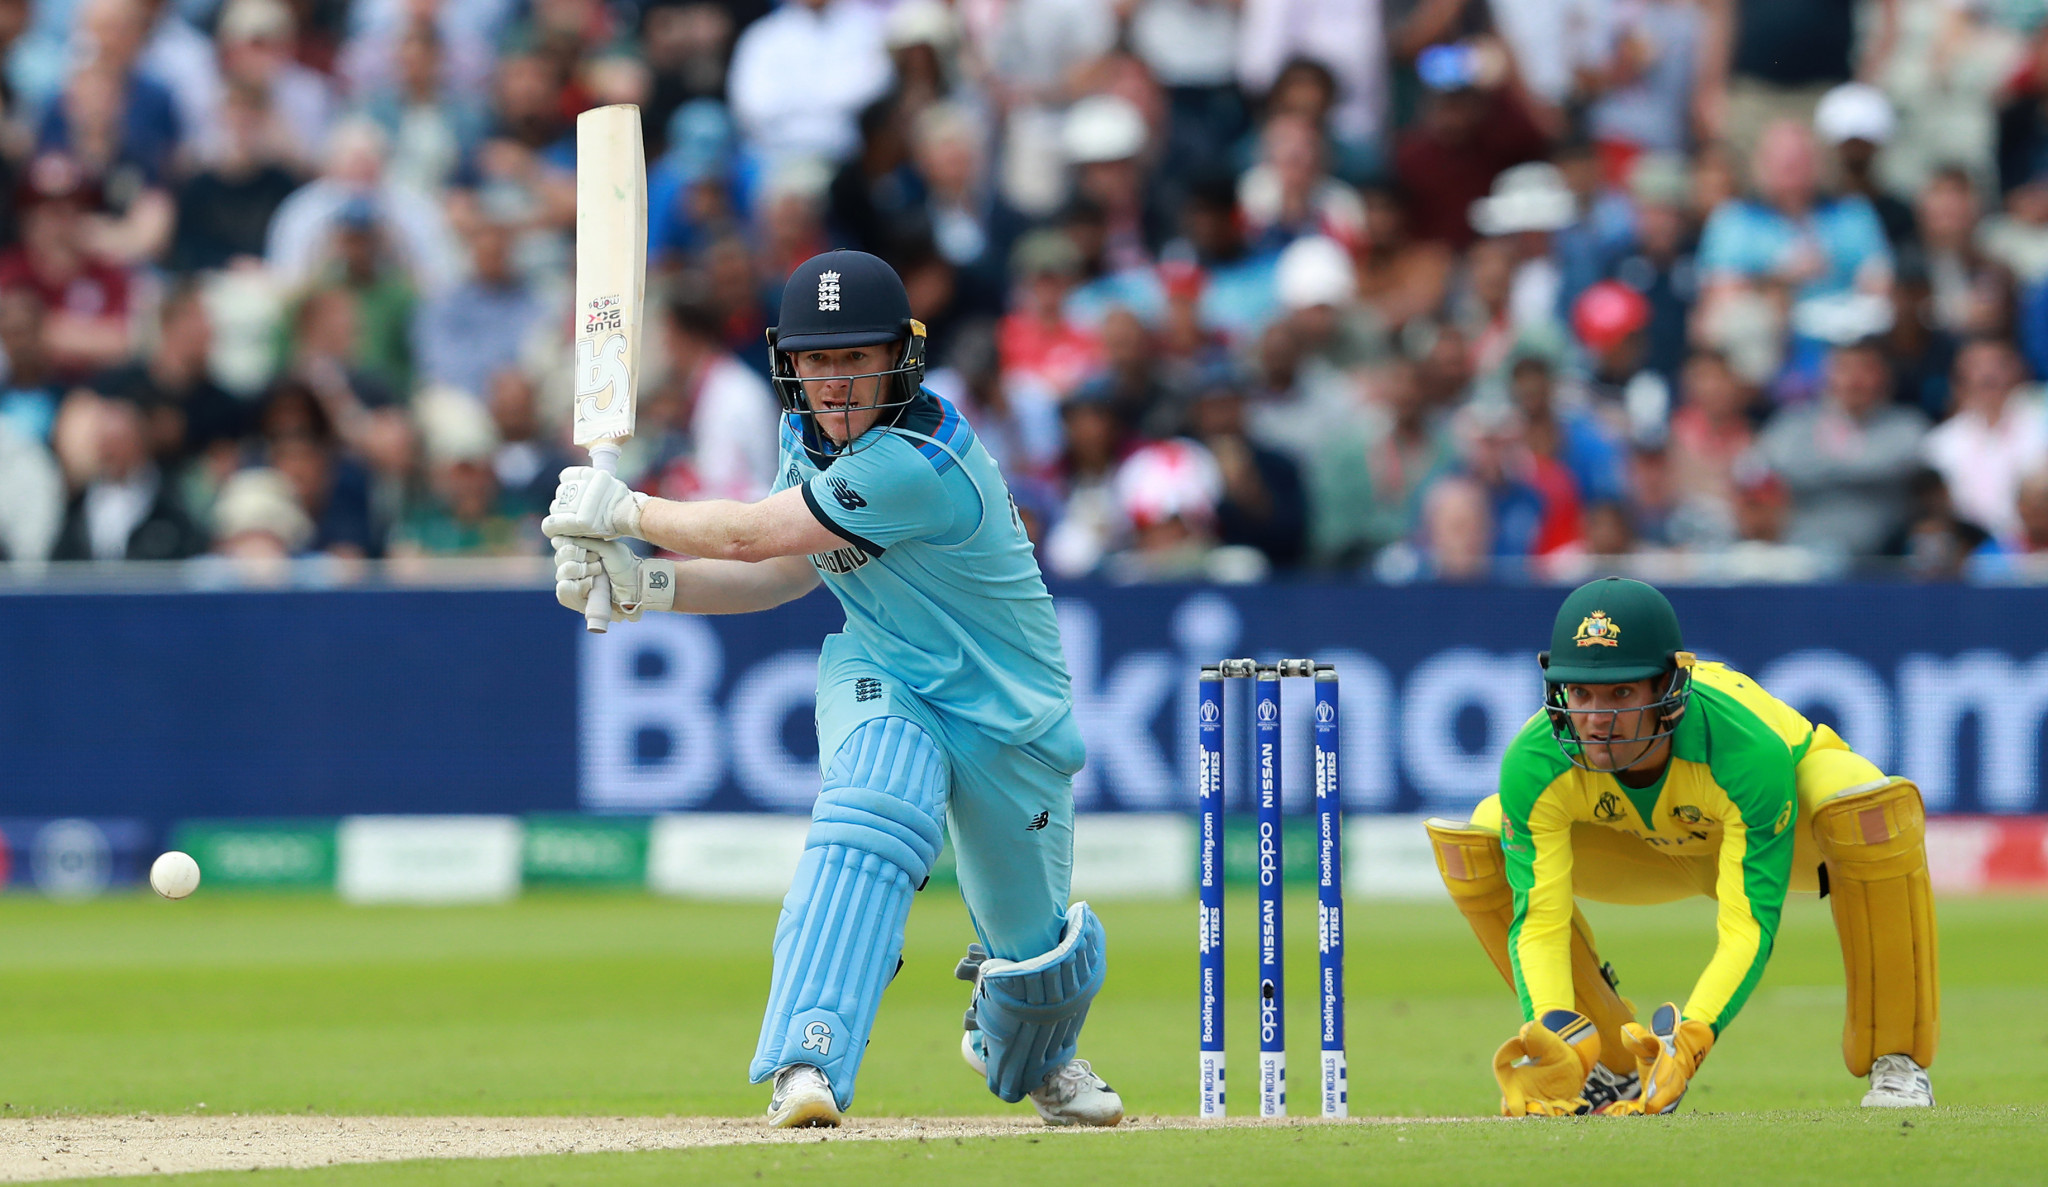 Cricket's Twenty20 format has been deemed as the most likely to appear at the Olympic Games ©Getty Images